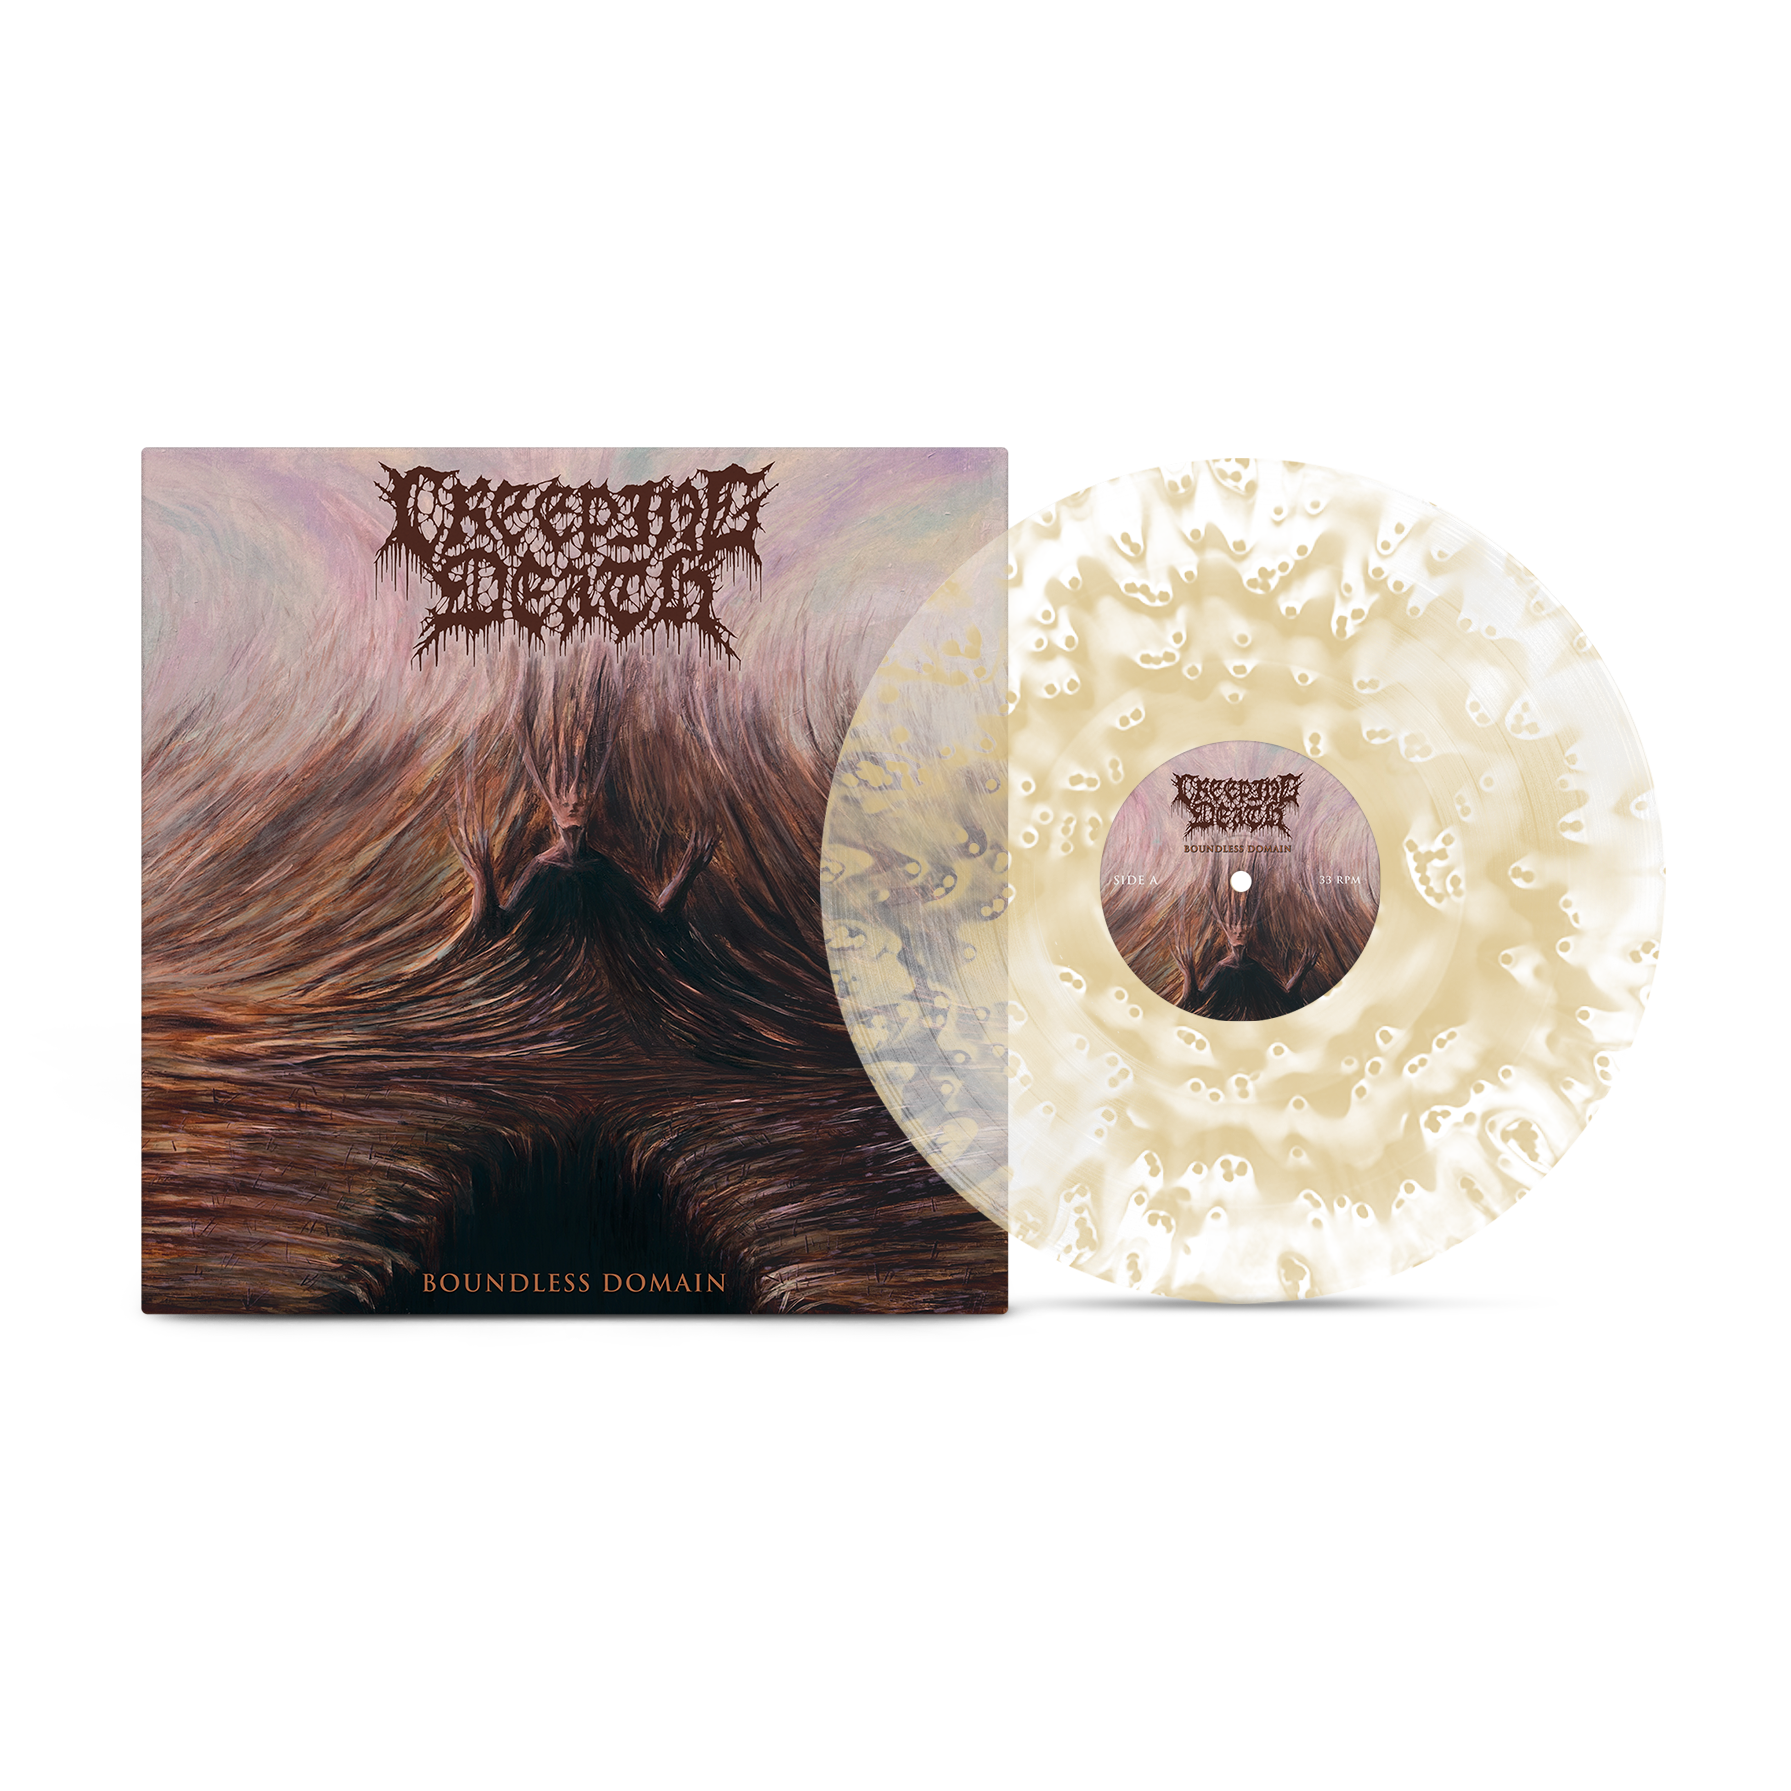 Creeping Death, Boundless Domain available on Clear & Tan Ghostly Vinyl. Available on MNRK HEAVY.